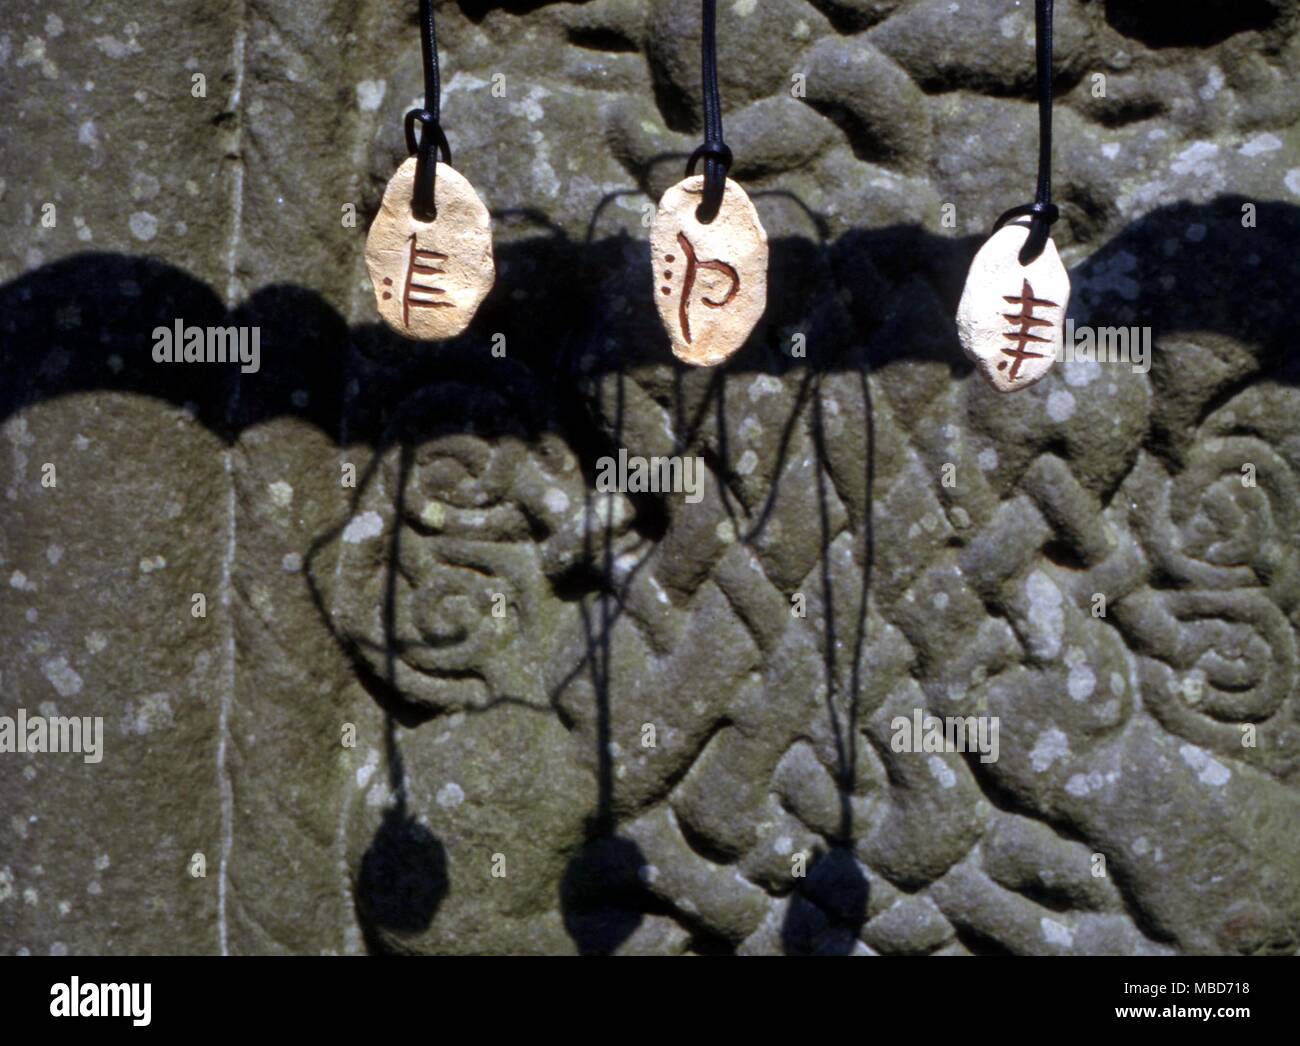 Celtic - Ogham Stones - from left to right - February (Willow) Earth (Beech, the Phagos) and Water (Poplar ). Hanging near the socle of the Southern Cross at Monasterboice, Ireland - The ogham alphabet is said to have originated in the fourth or fifth century in southern Ireland. It is widely regarded as the oldest alphabet used in Ireland. The alphabet takes its name from Ogma the ancient Celtic god of elocution or fine speech. It was Ogma, as legend has it, who inspired this alphabet. The main twenty letters in this alphabet are divided into four categories of five sounds (see Alpha Stock Photo